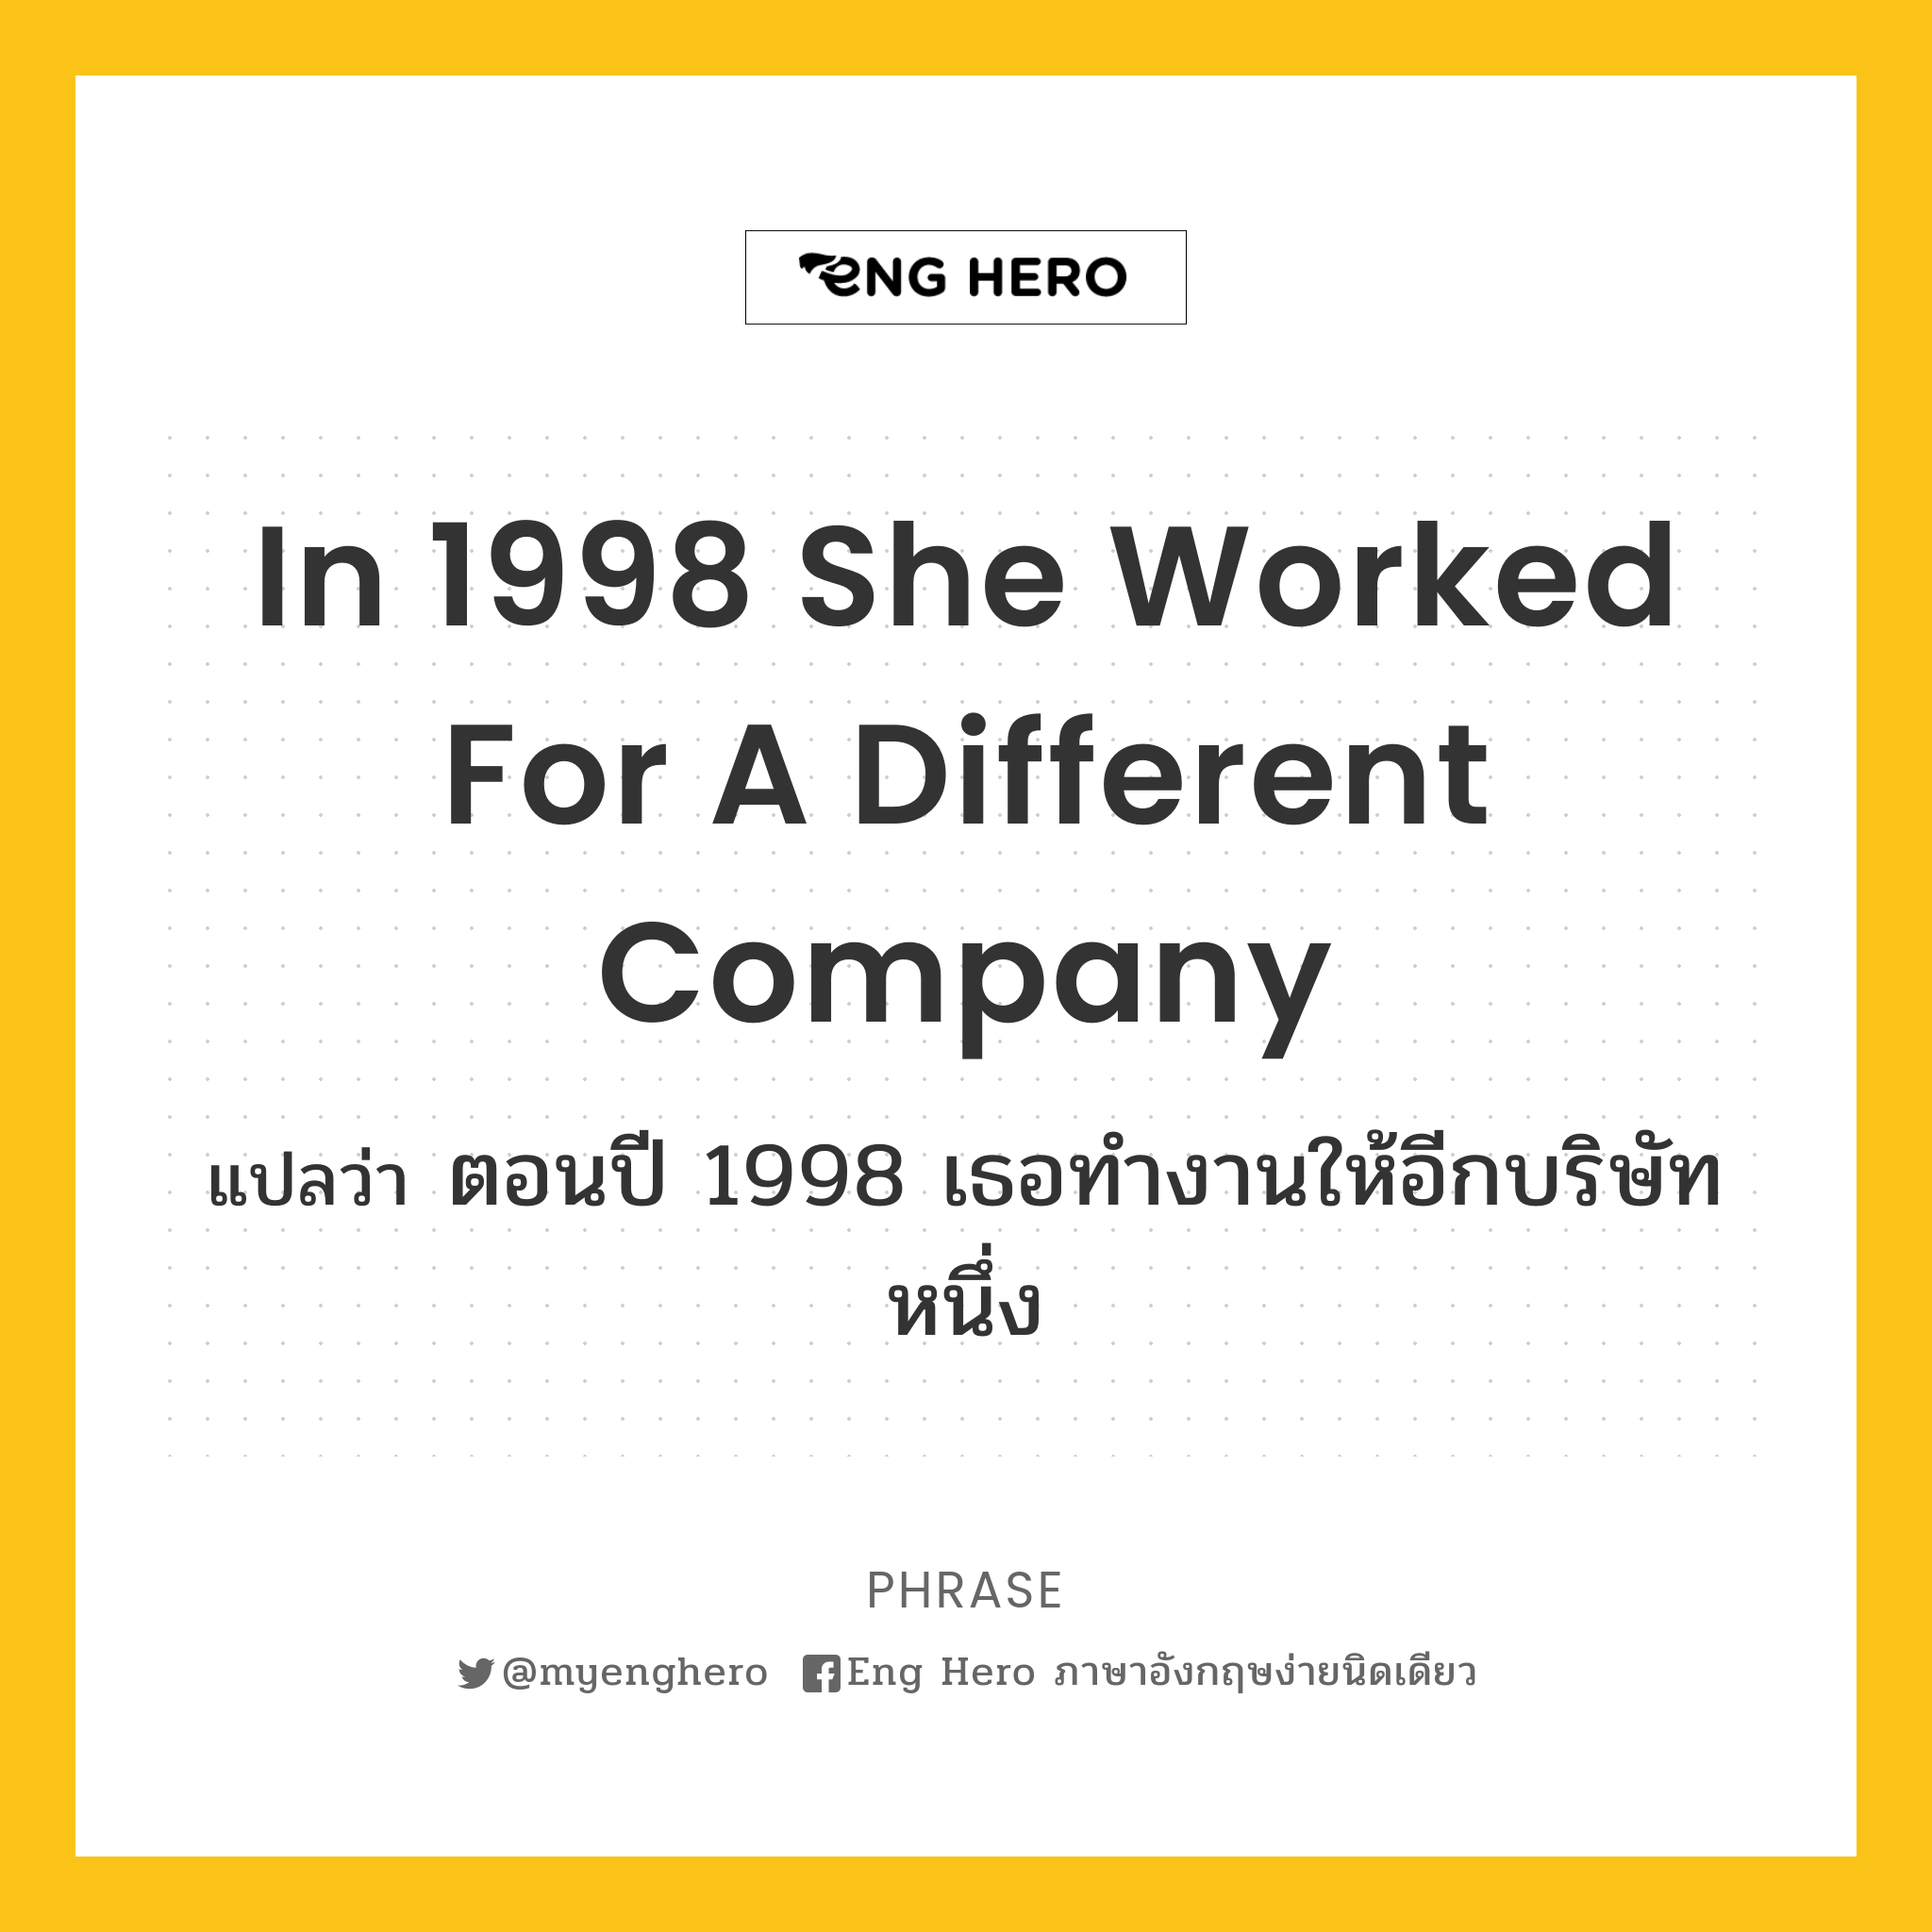 In 1998 she worked for a different company